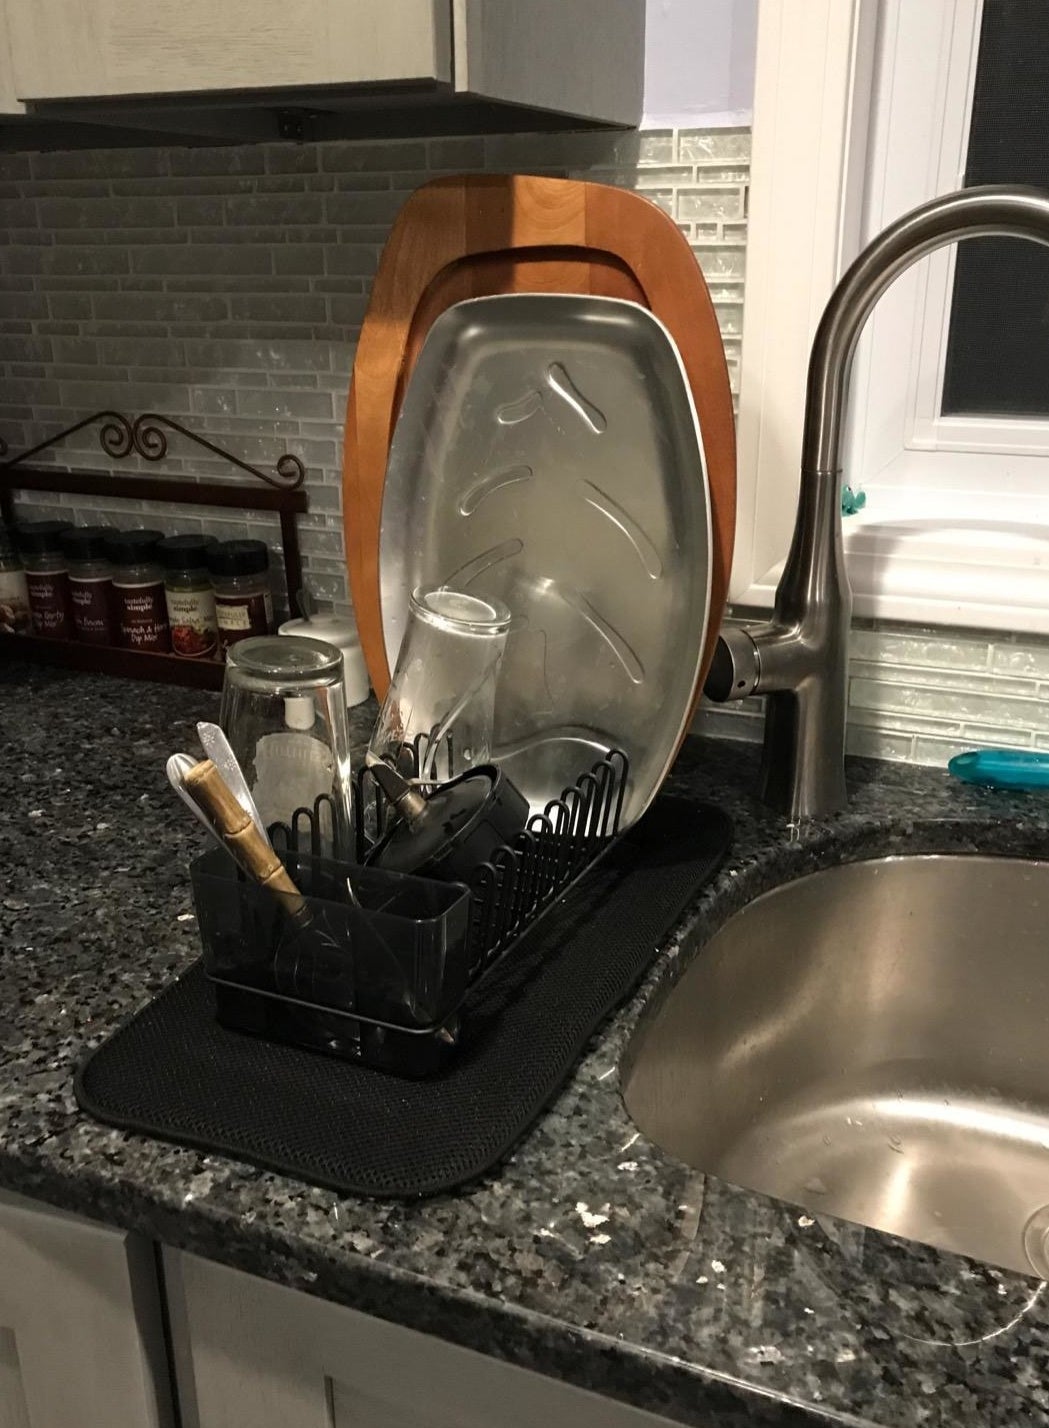 Reviewer picture of the small dish drying rack with the black mat under it with assorted dishes in it next to a sink